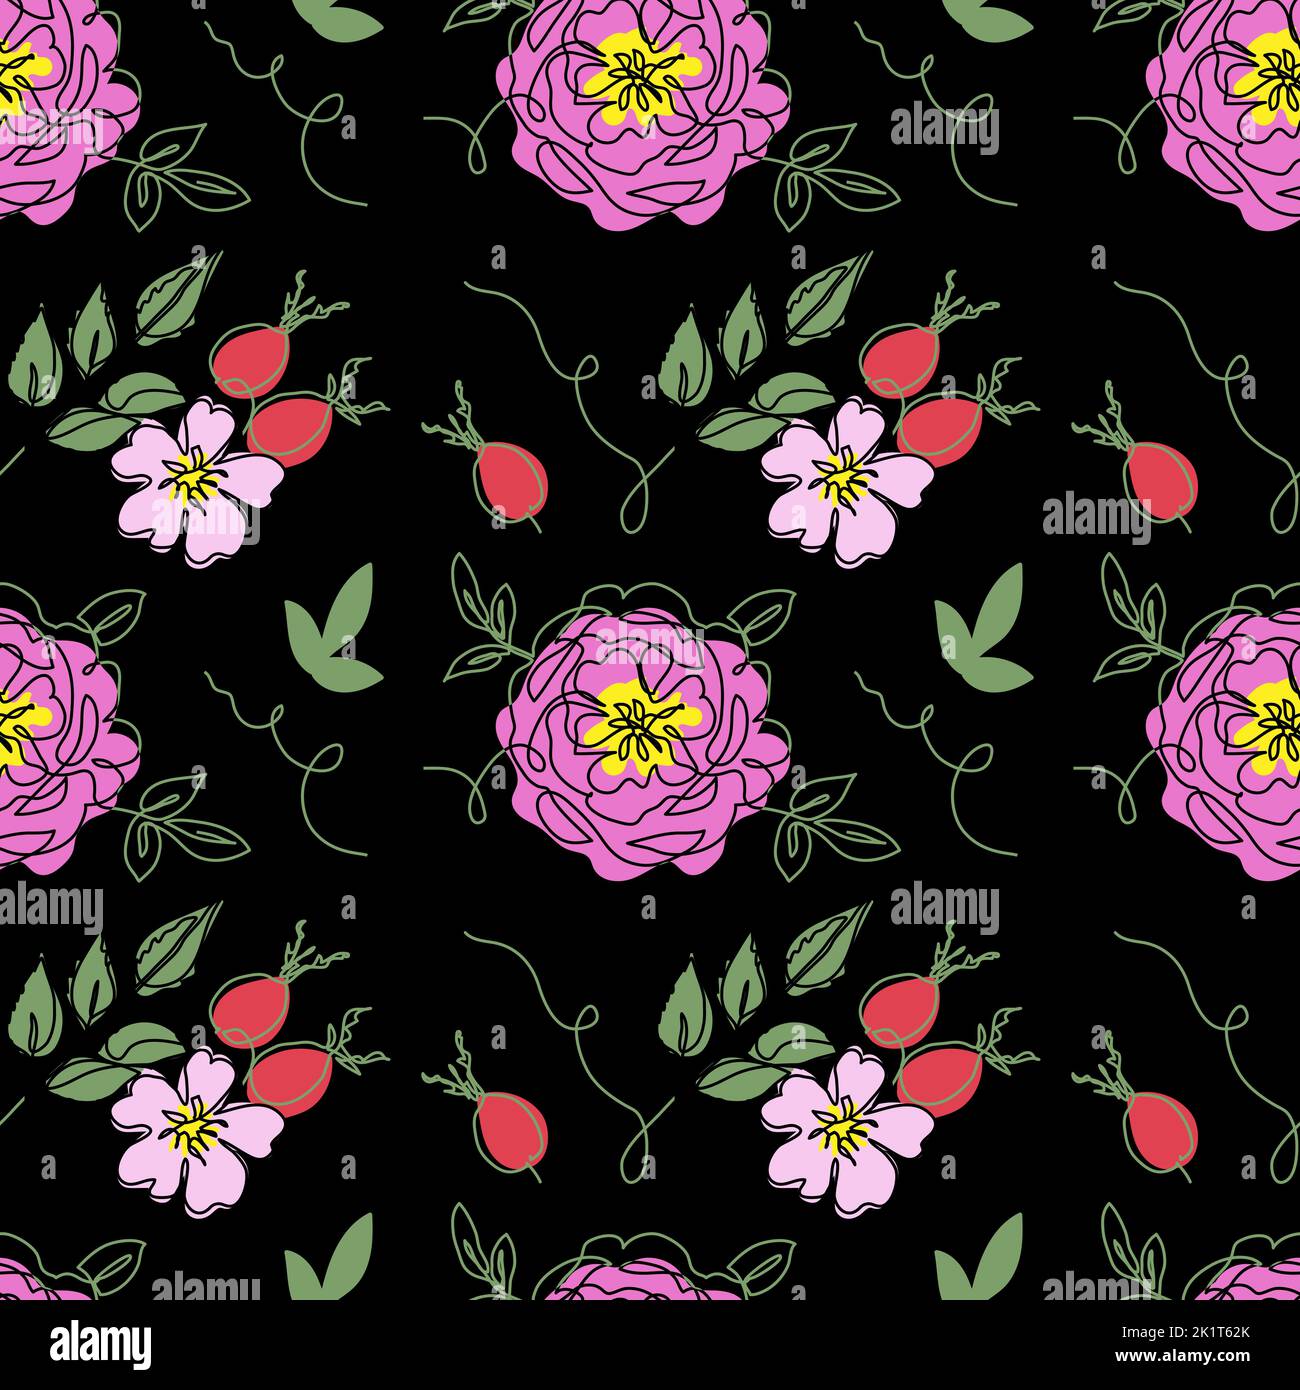 Dog rose, rosehip, briar, rosa canina, wild rose vector seamless pattern on black background. One continuous line art drawing of flowers and berries Stock Vector